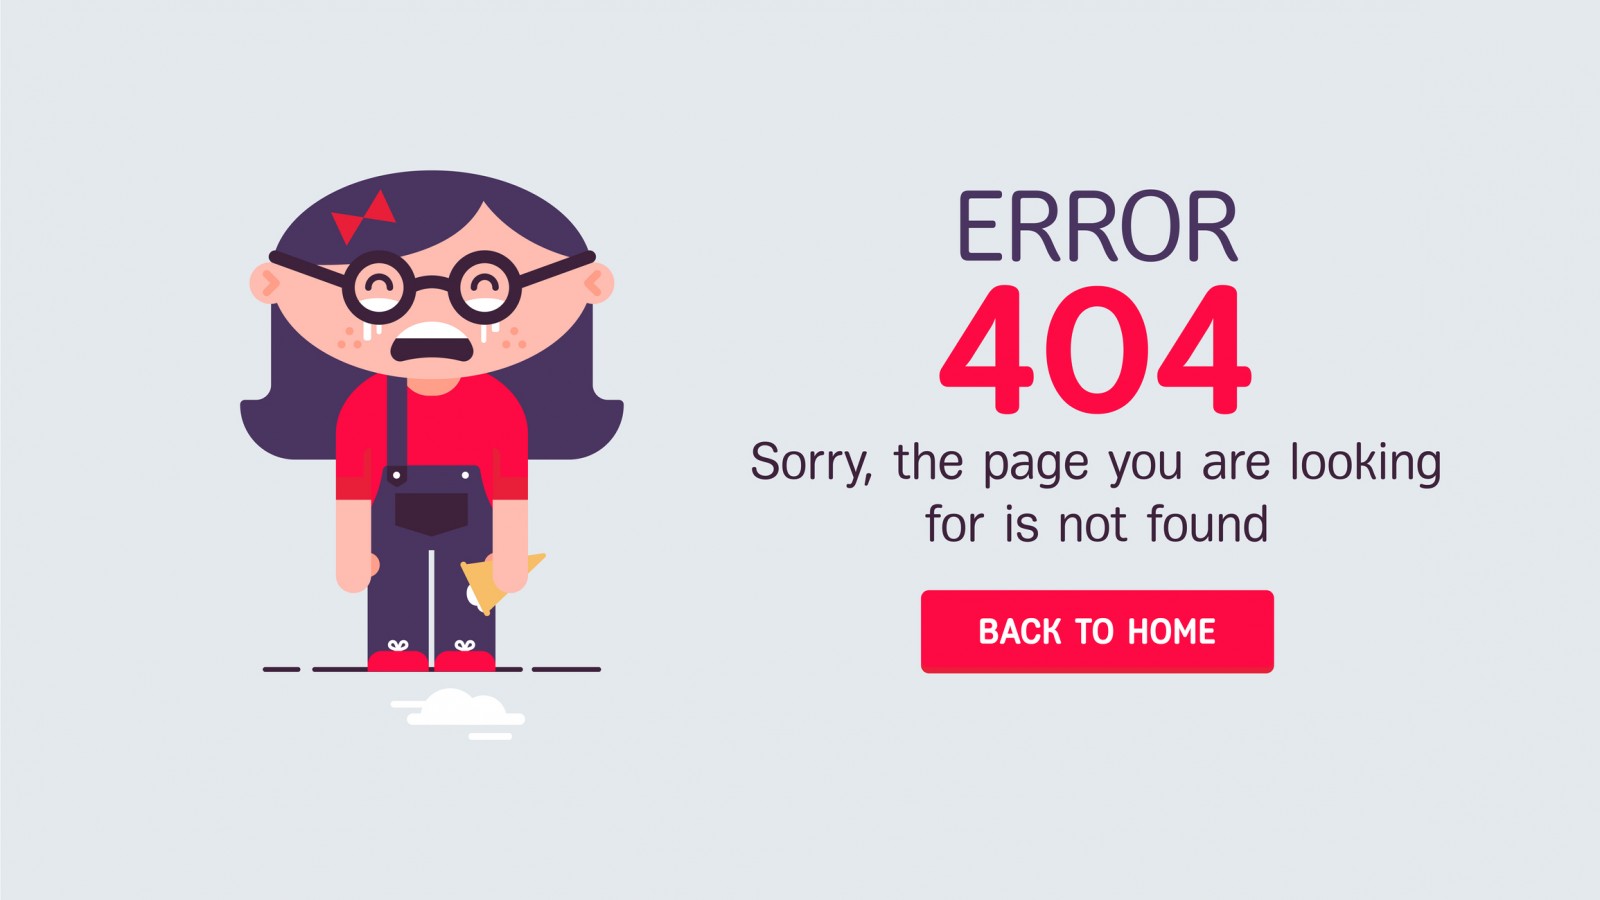 404 Page Not Found 